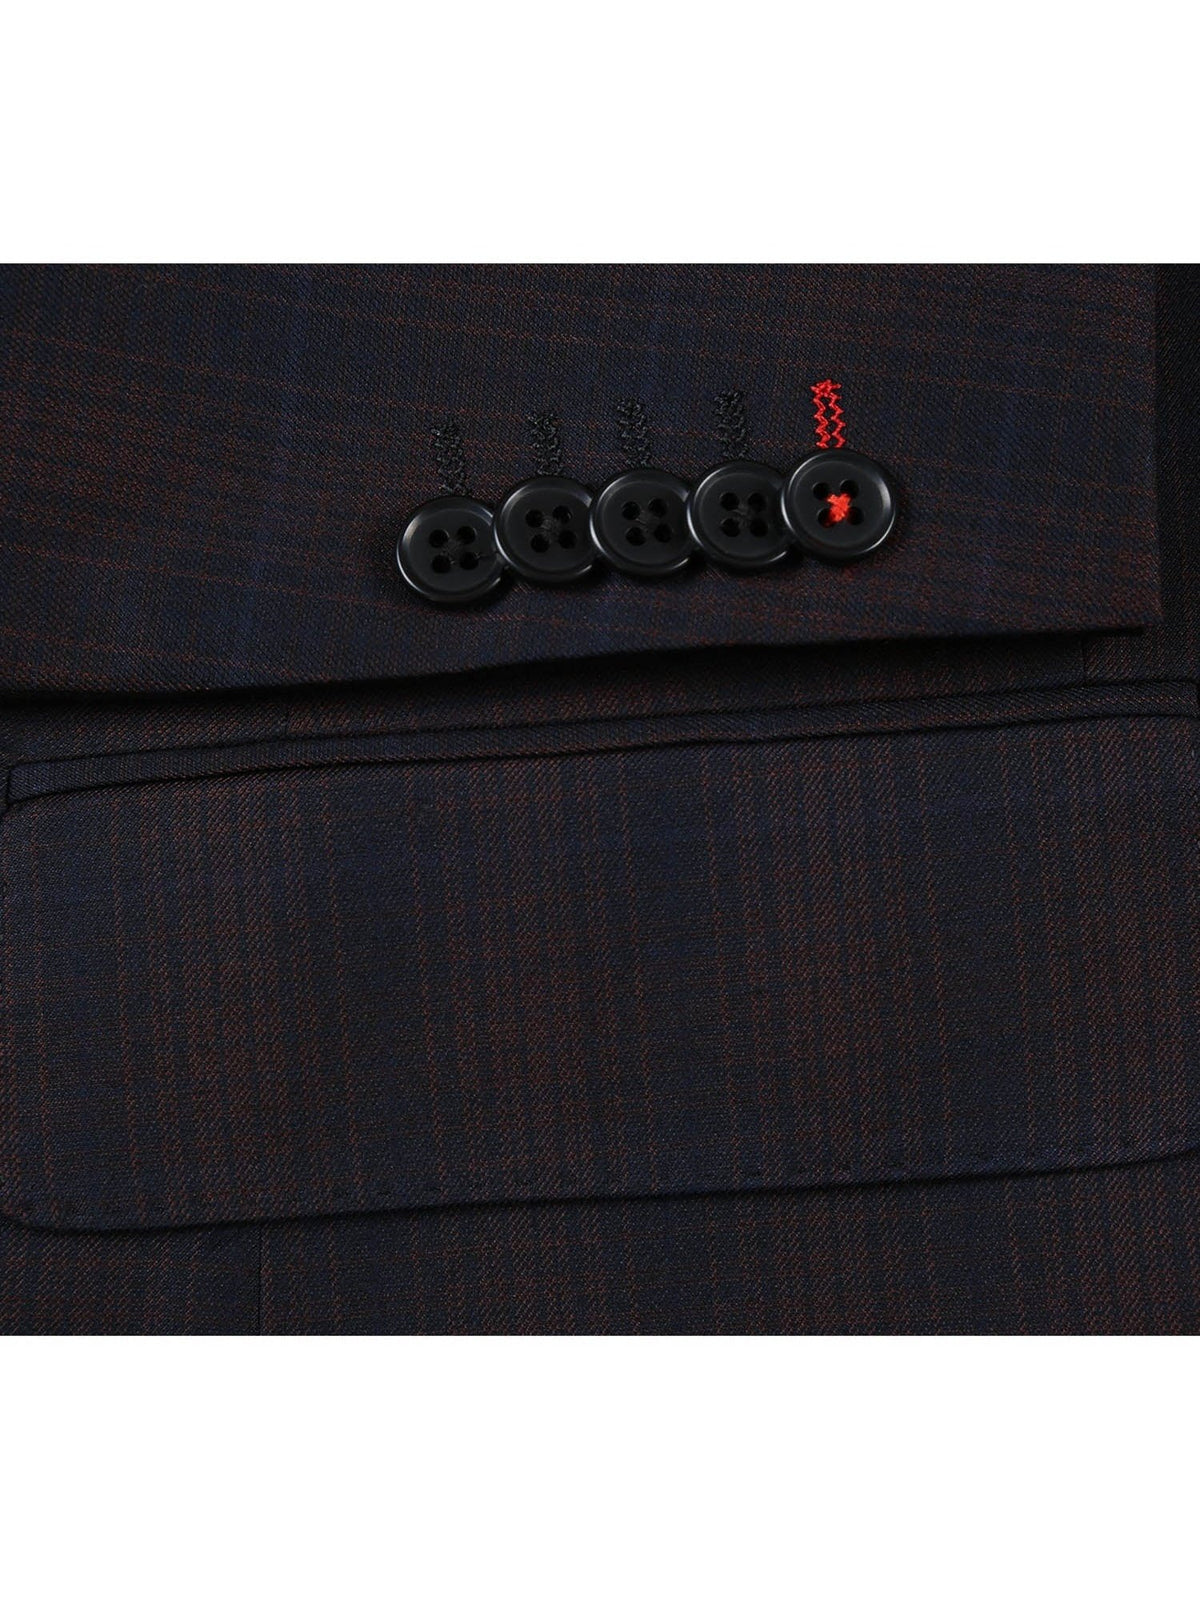 English Laundry Slim Fit Two button Coffee with Red Check Peak Lapel Suit